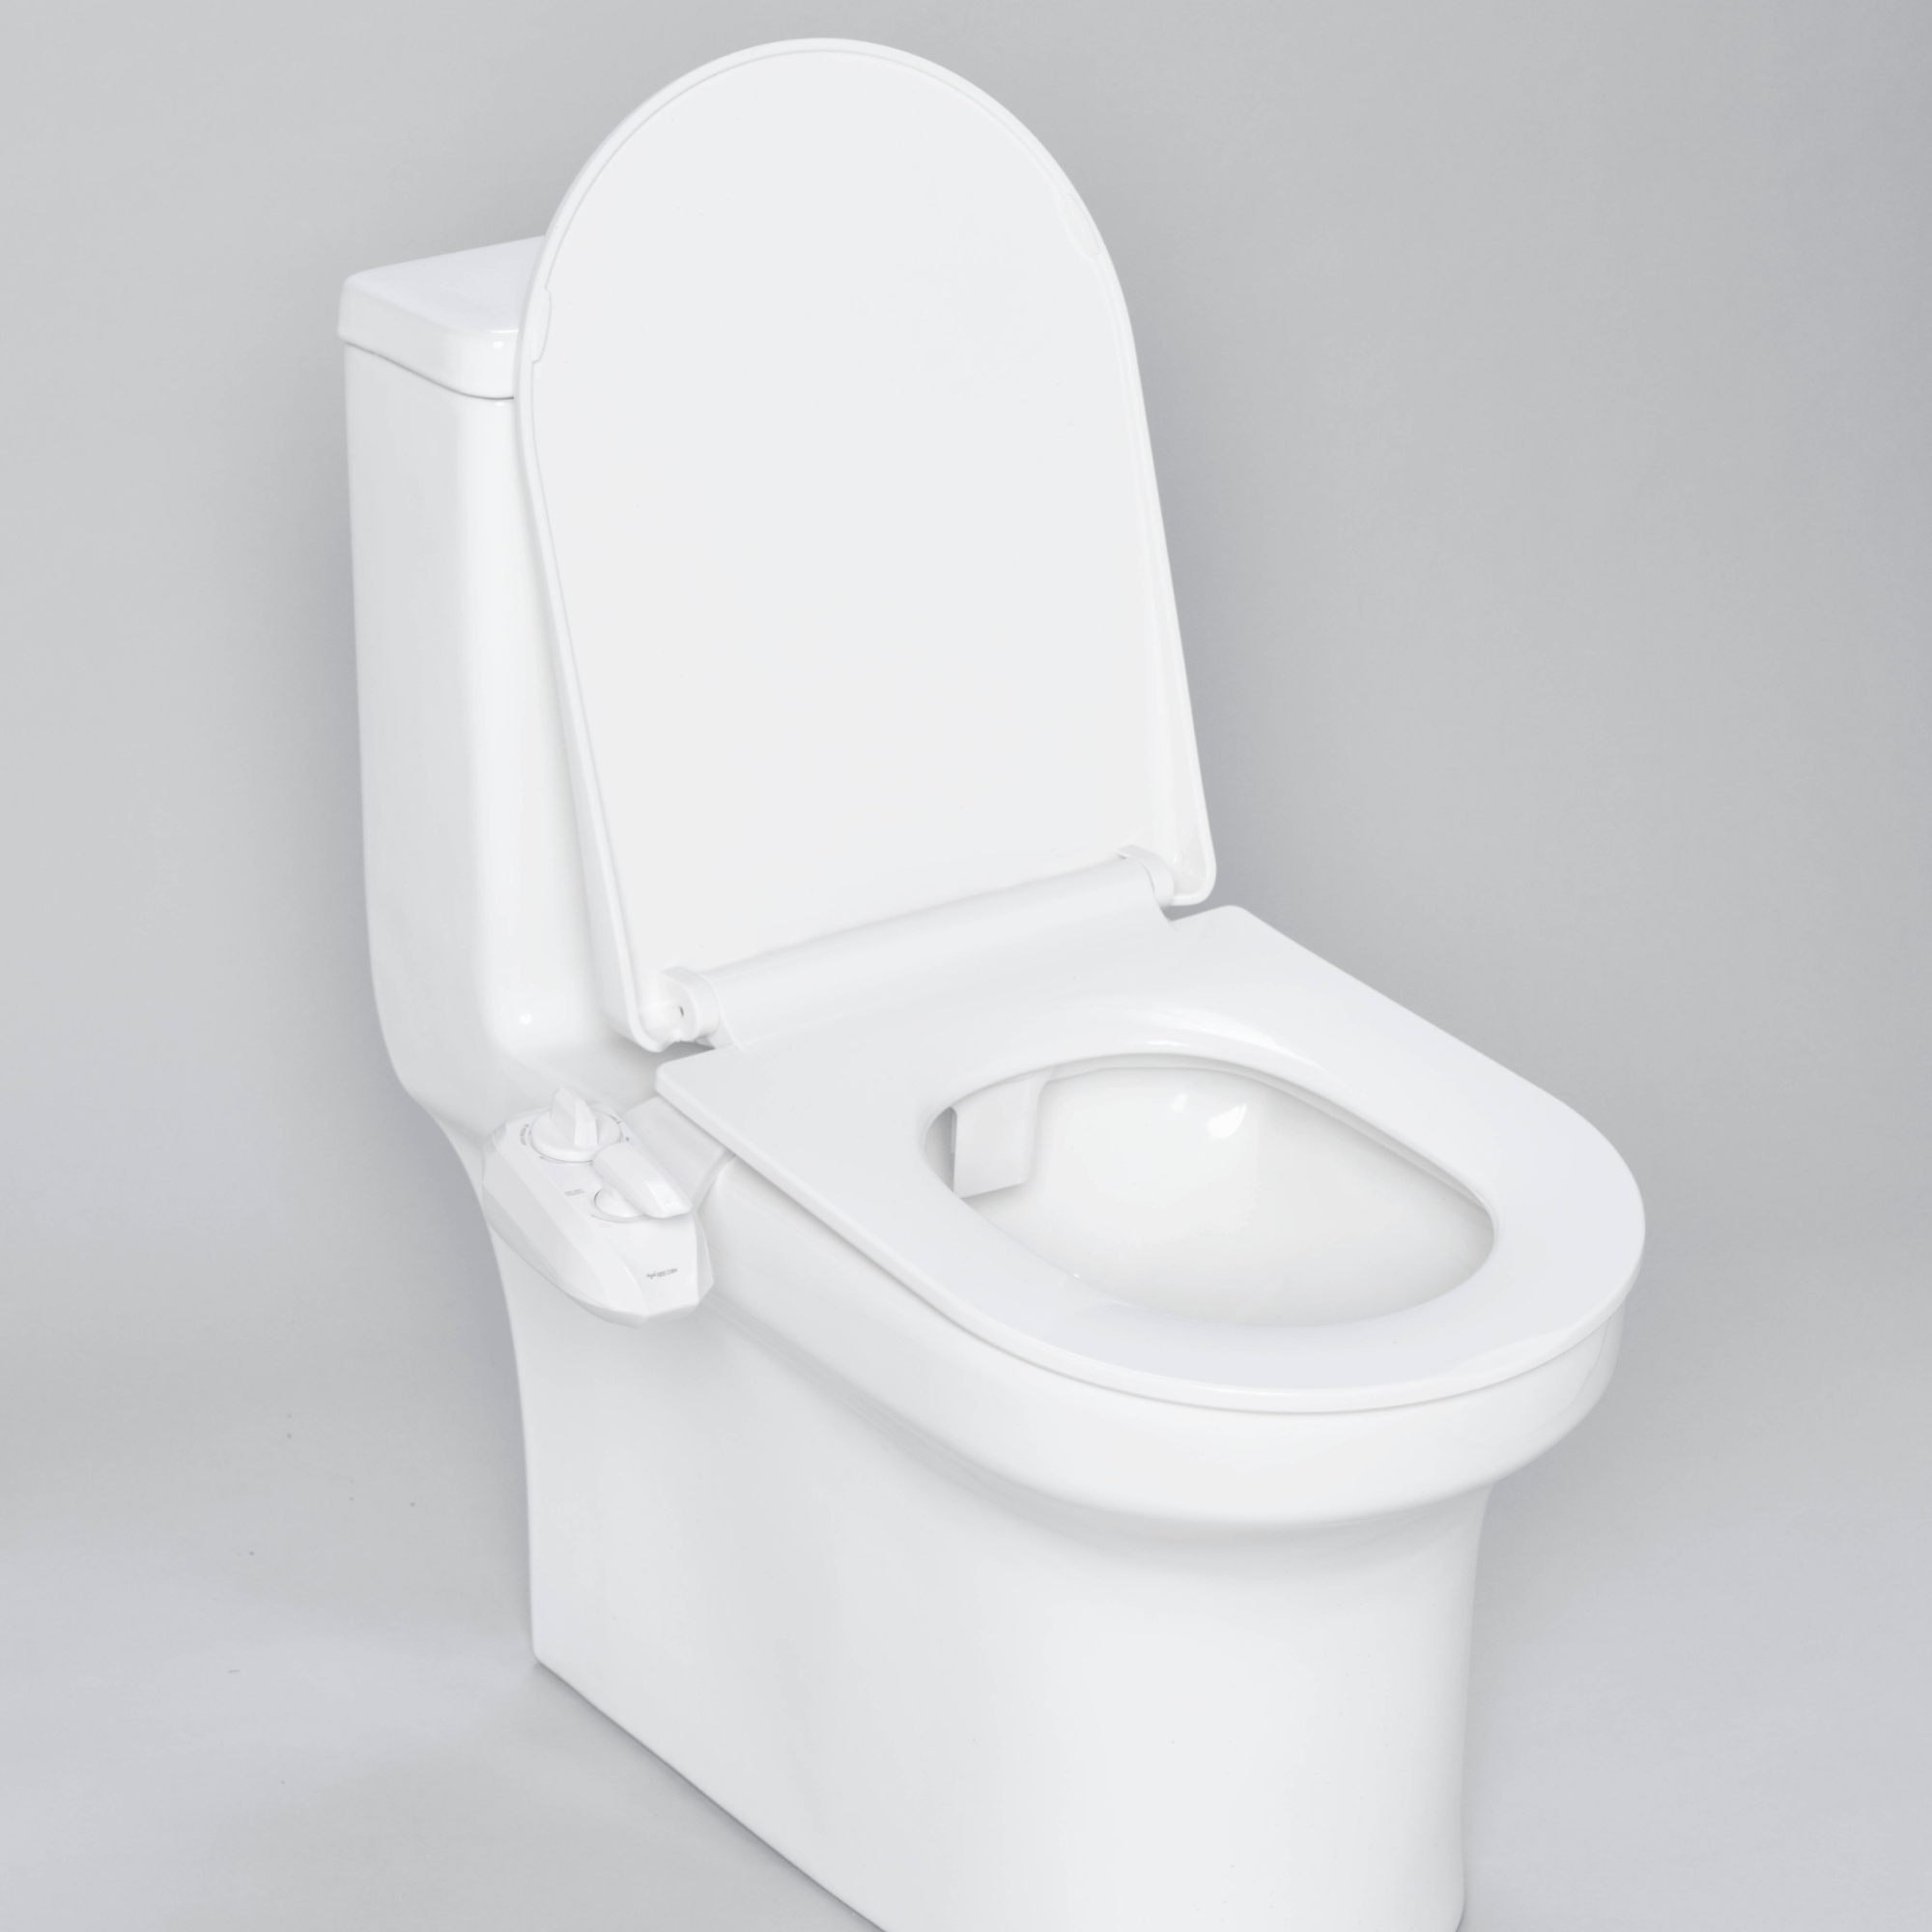 NEO 320 Plus: Imperfect Packaging - NEO 320 Plus White installed on a modern toilet, with lid open